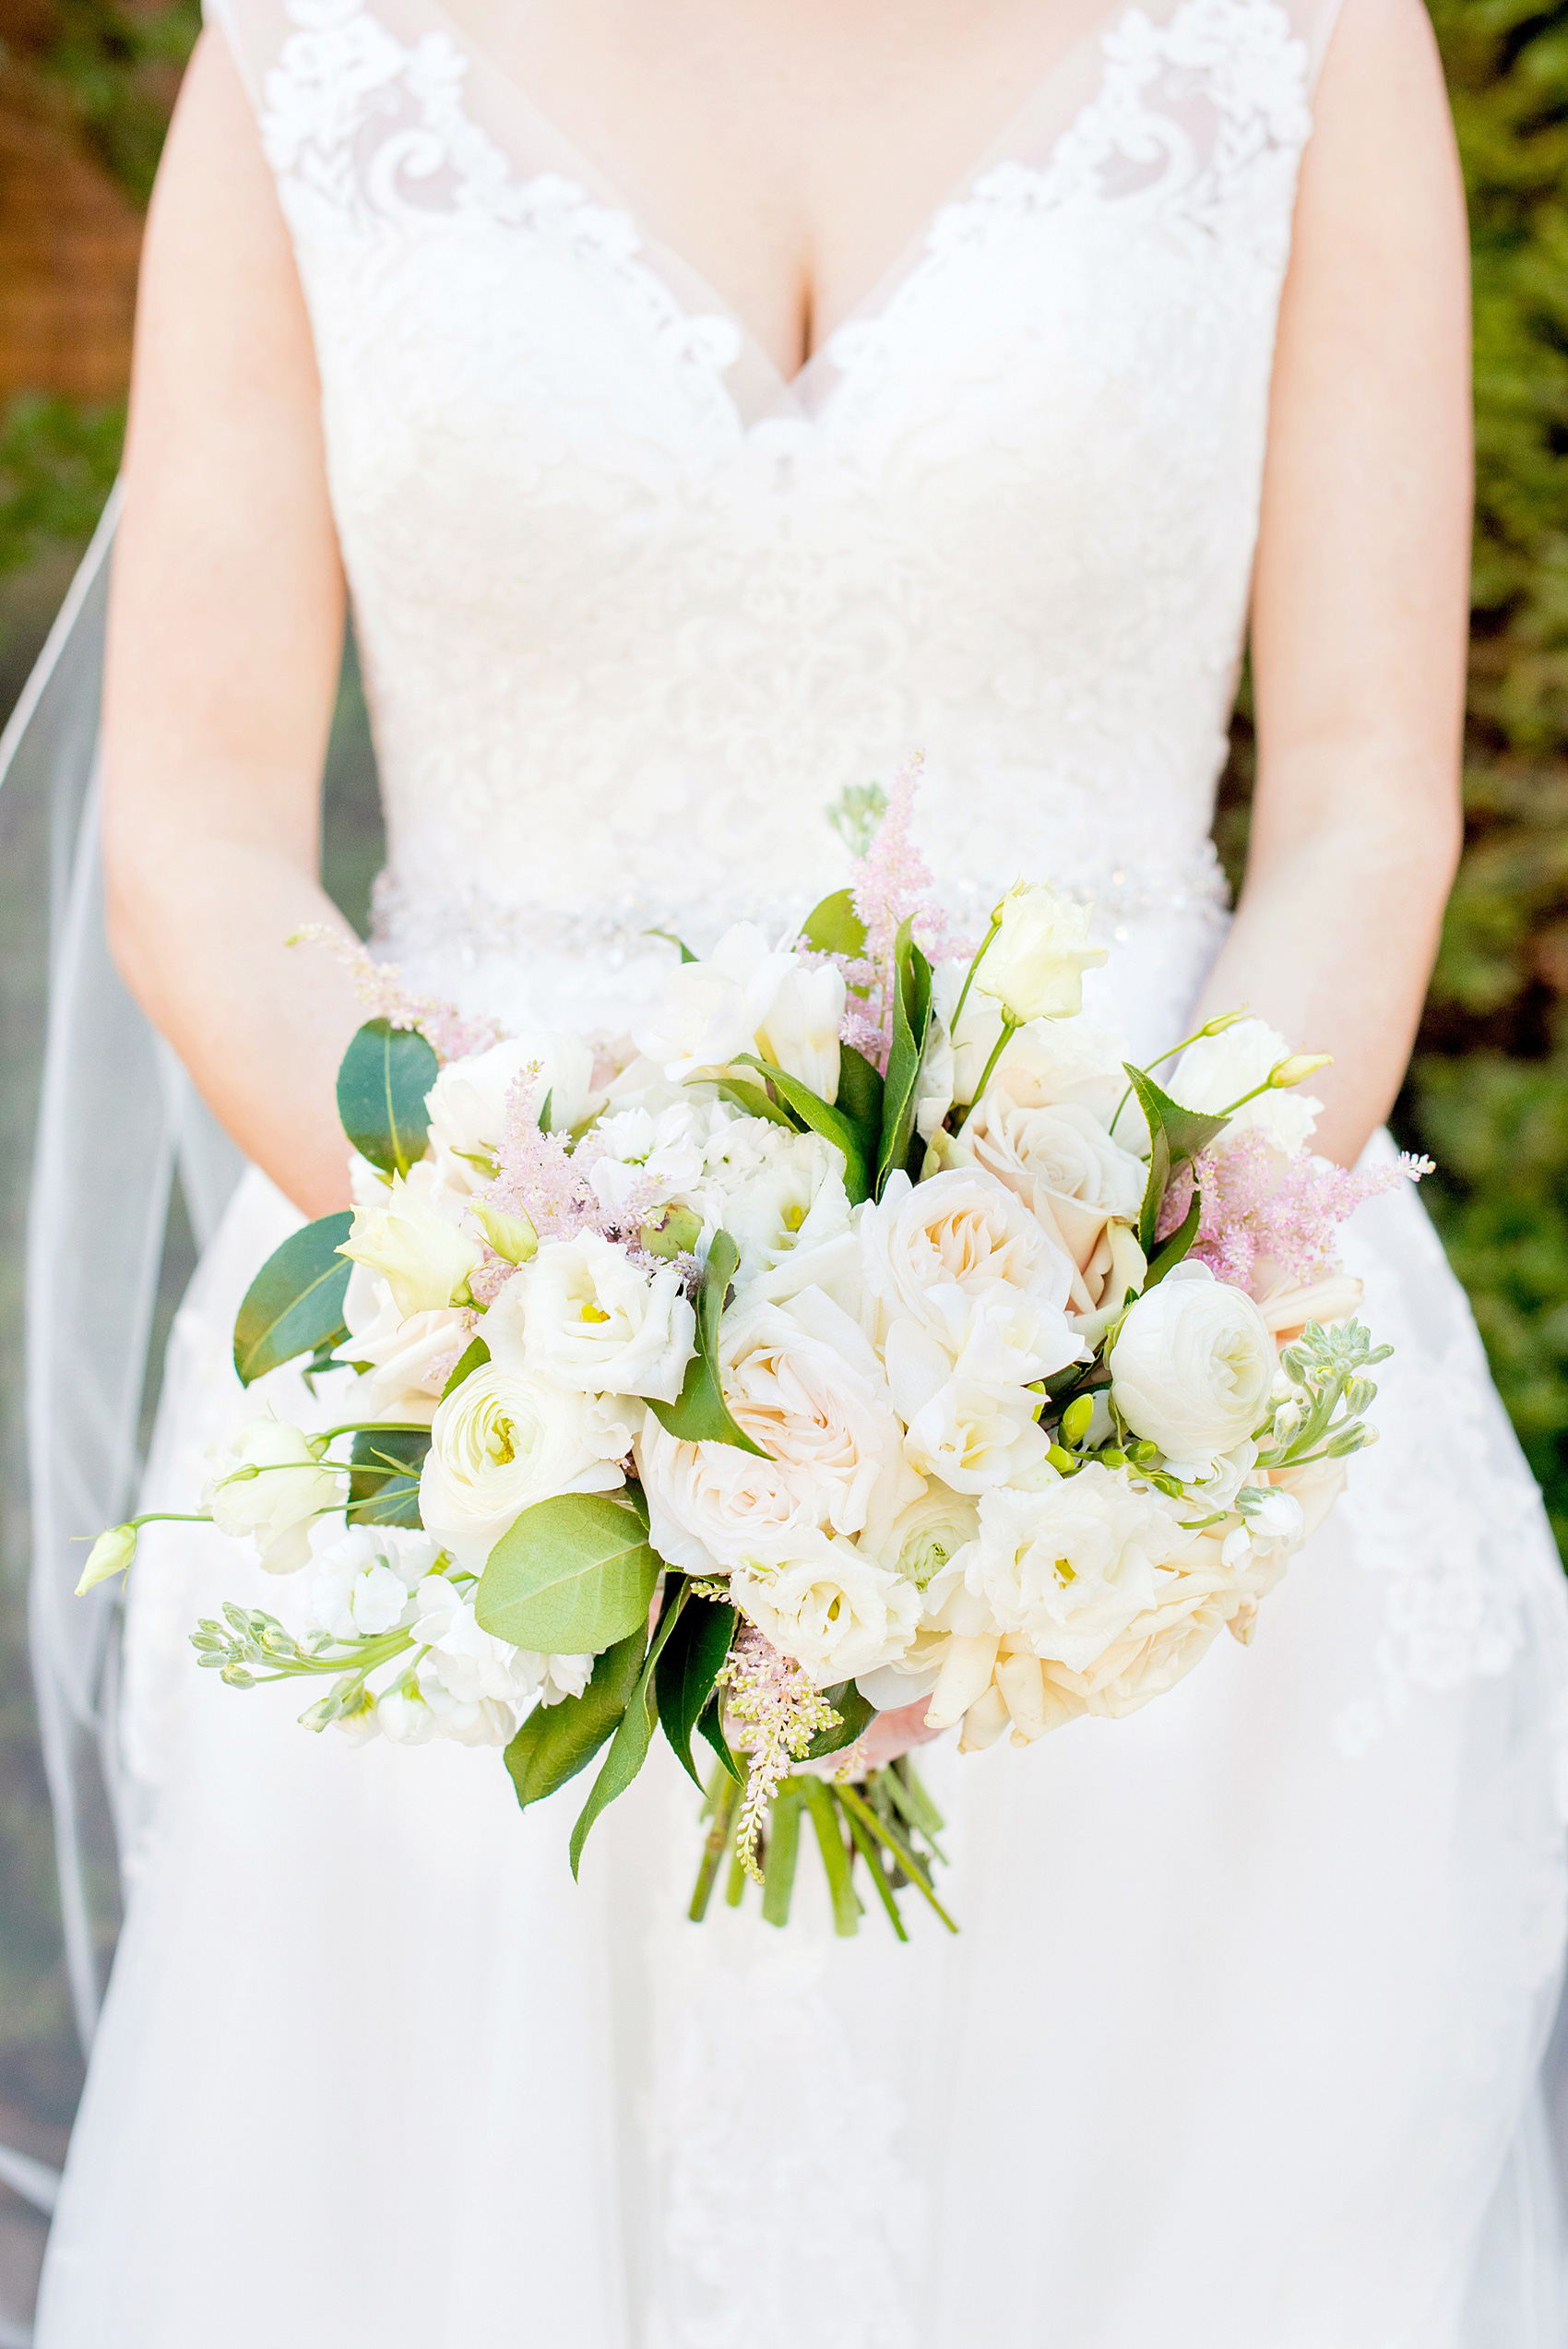 Photos from Saratoga Springs, New York by Mikkel Paige Photography. In this picture the bride holds her bouquet of peach roses, white ranunculus, lisianthus and astilbe for her spring wedding. #SaratogaSprings #golfcoursewedding #SaratogaSpringsNY #SpringWedding 